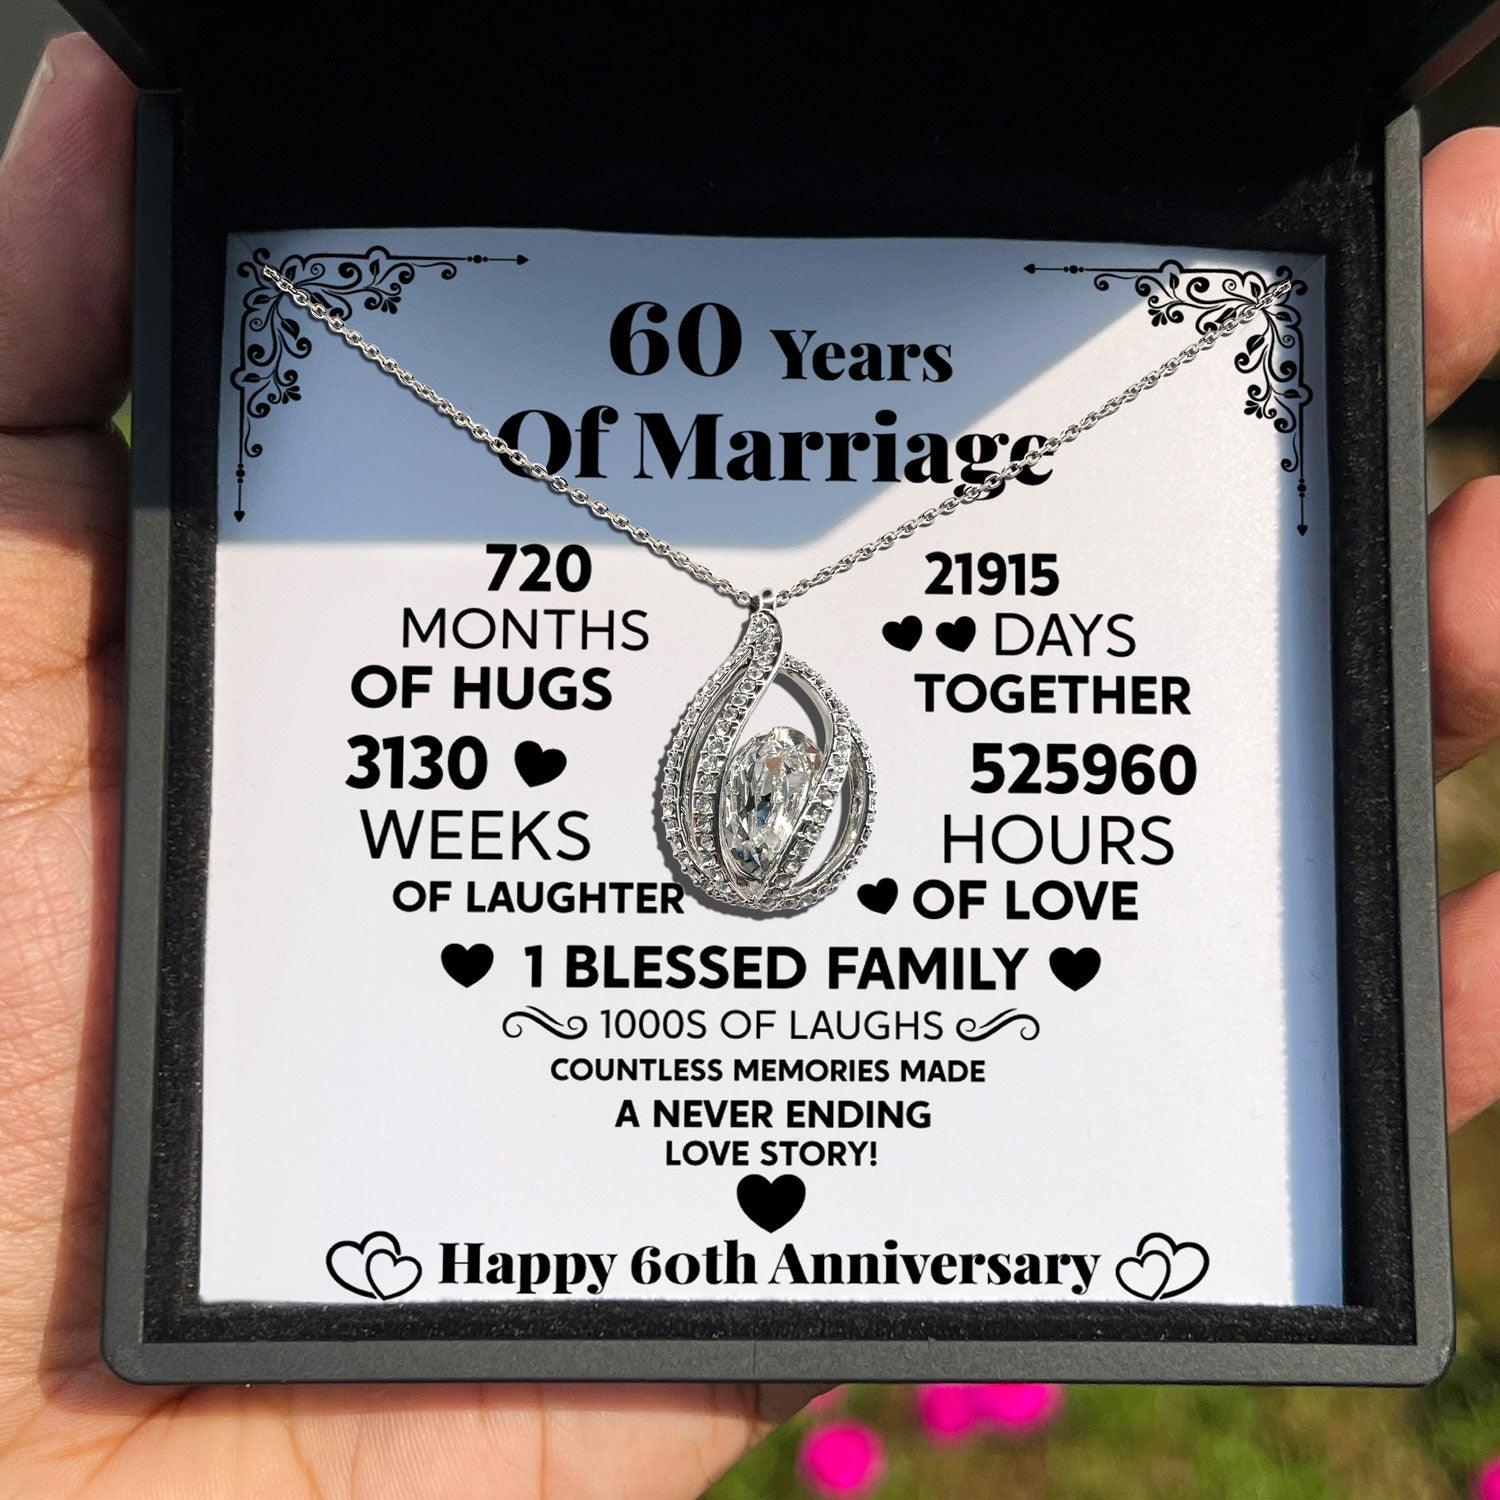 Anniversary Gifts for Her - 60 Years Of Marriage, 21915 Days Of Together, 525960 Hours Of Love - Orbital Birdcage Necklace - TRYNDI